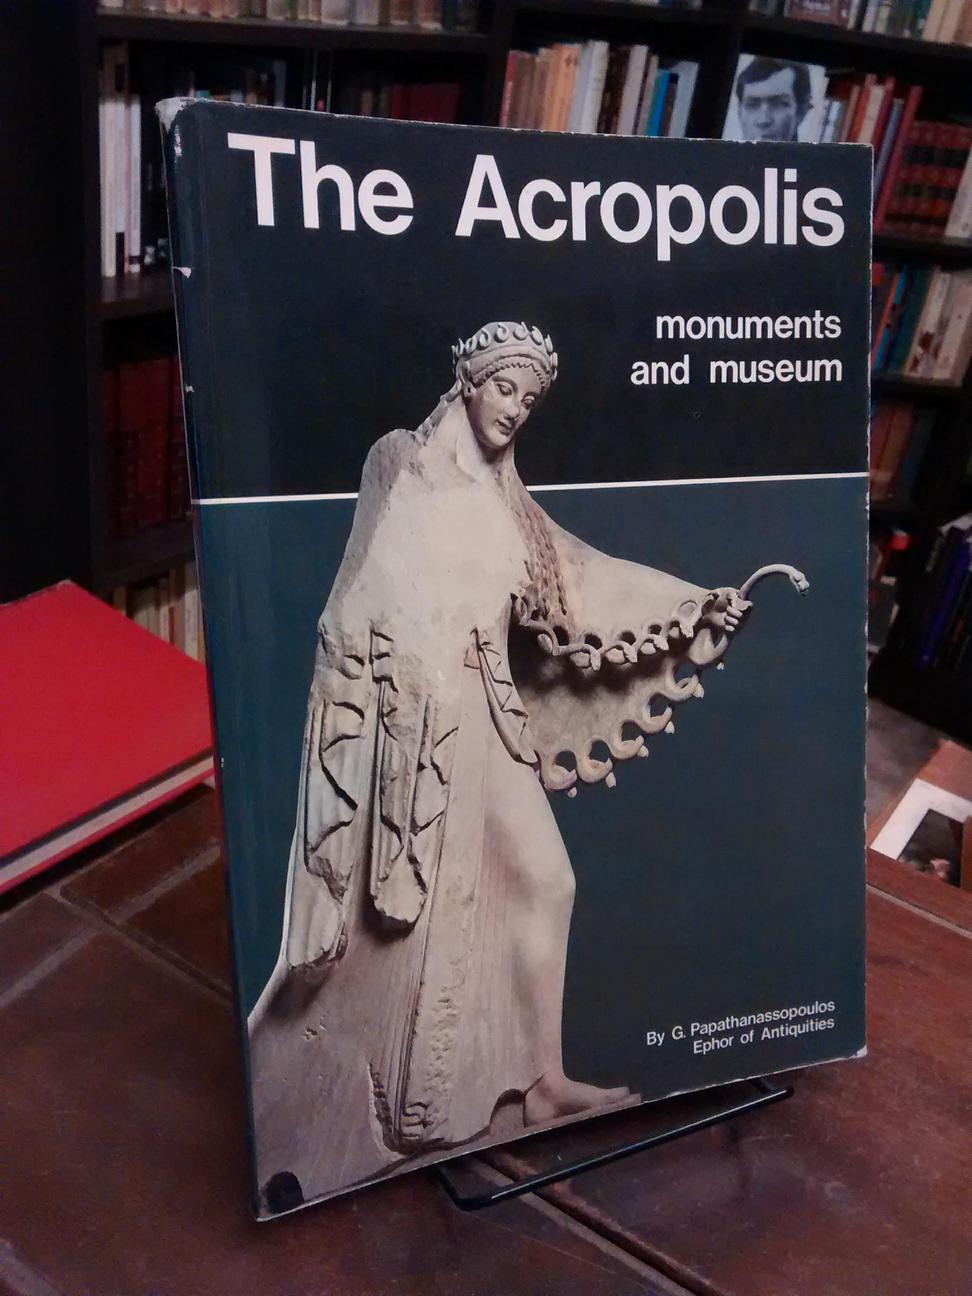 The Acropolis - G. Papathanassopoulos